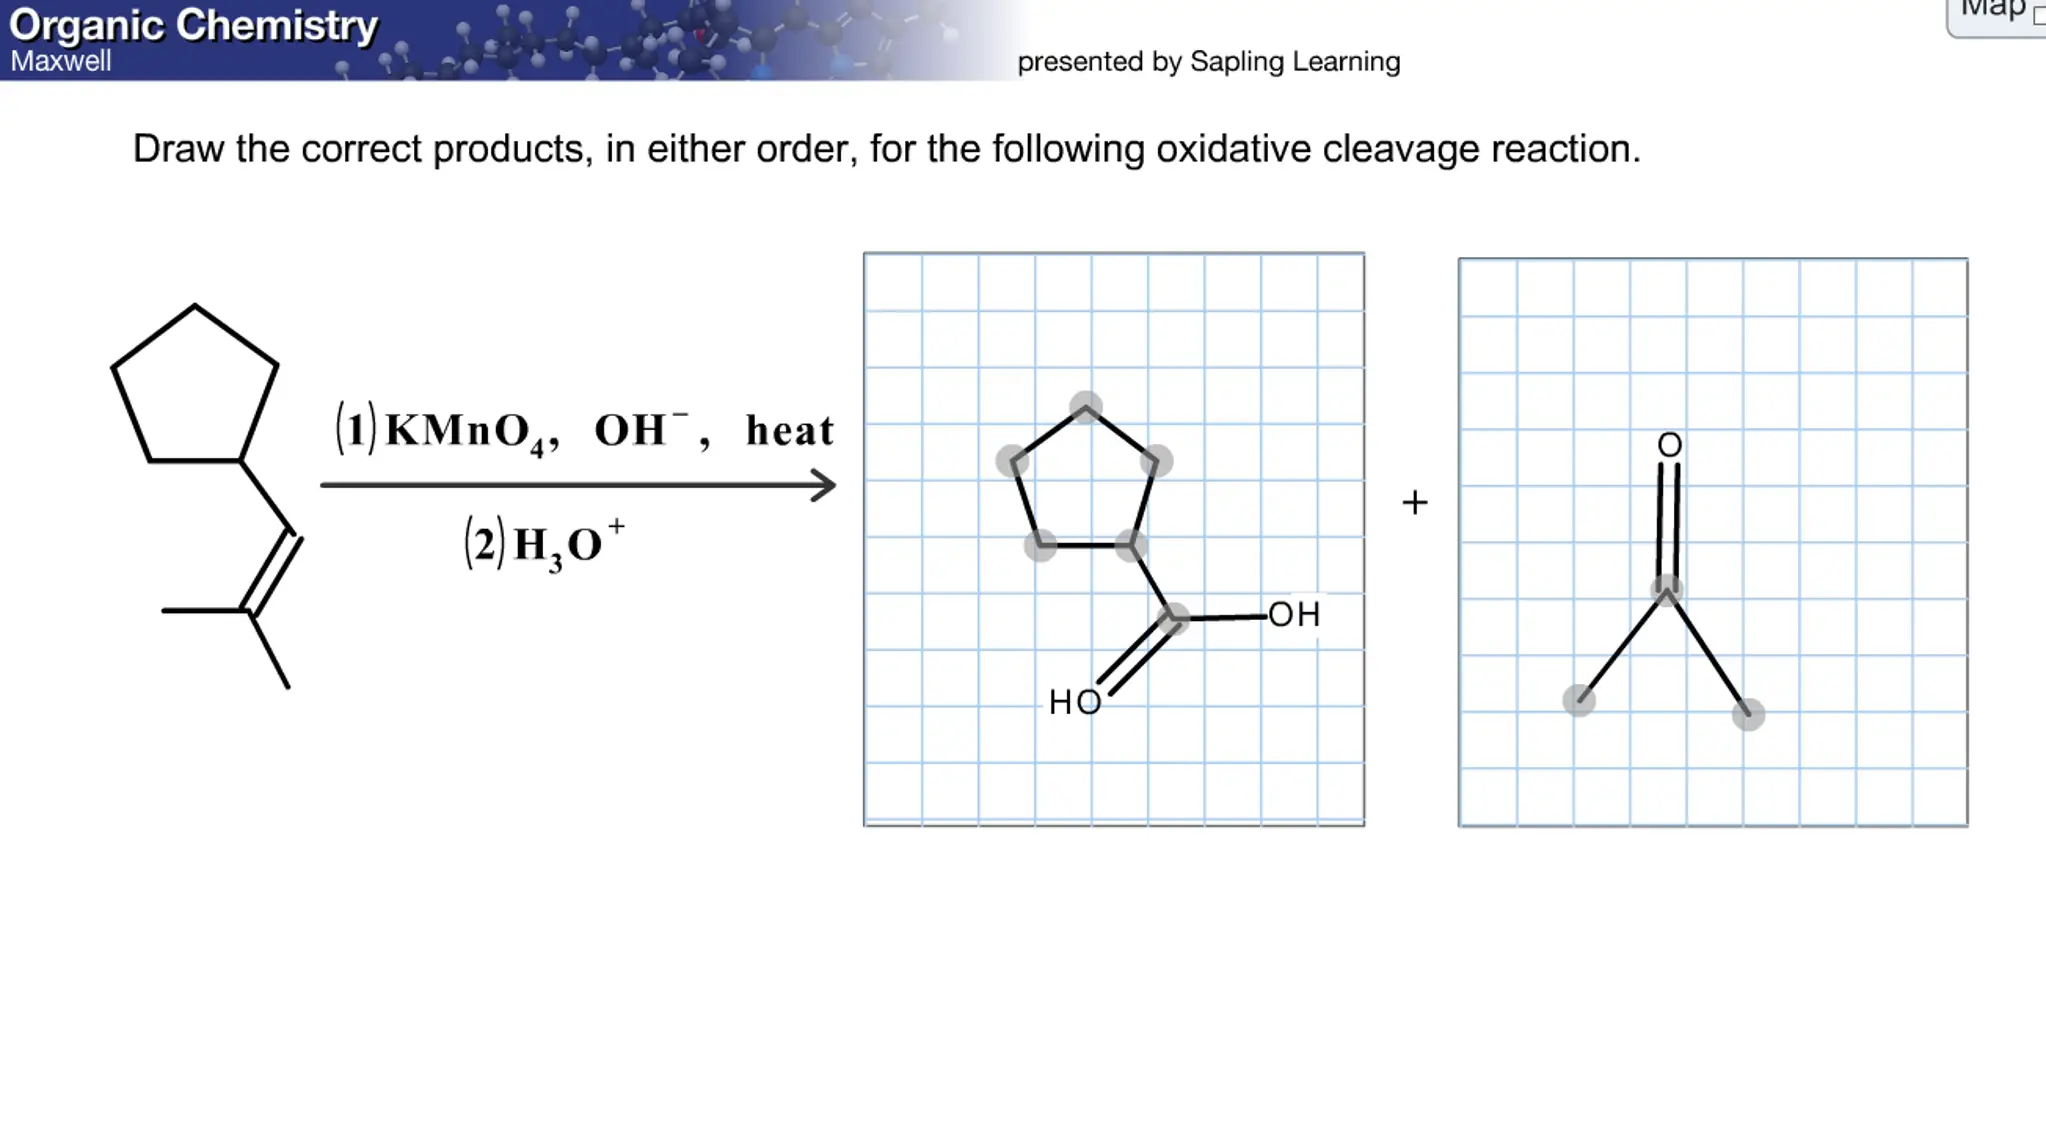 Draw the correct products, in either order, for the following oxidative cleavage reaction.